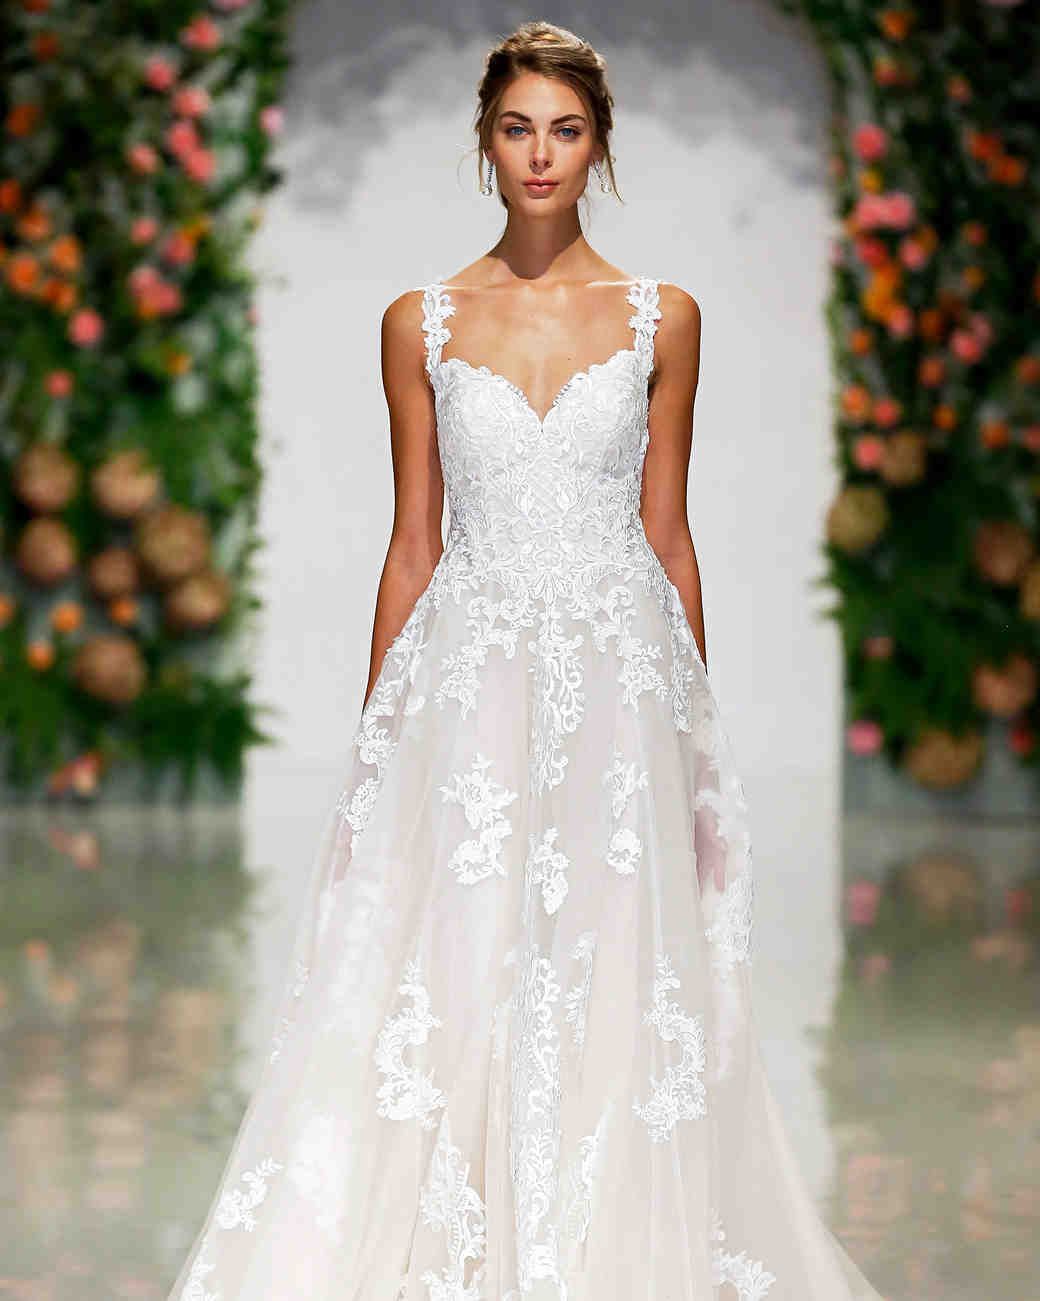 Morilee by Madeline Gardner Fall 2019 Wedding Dress Collection | Martha ...